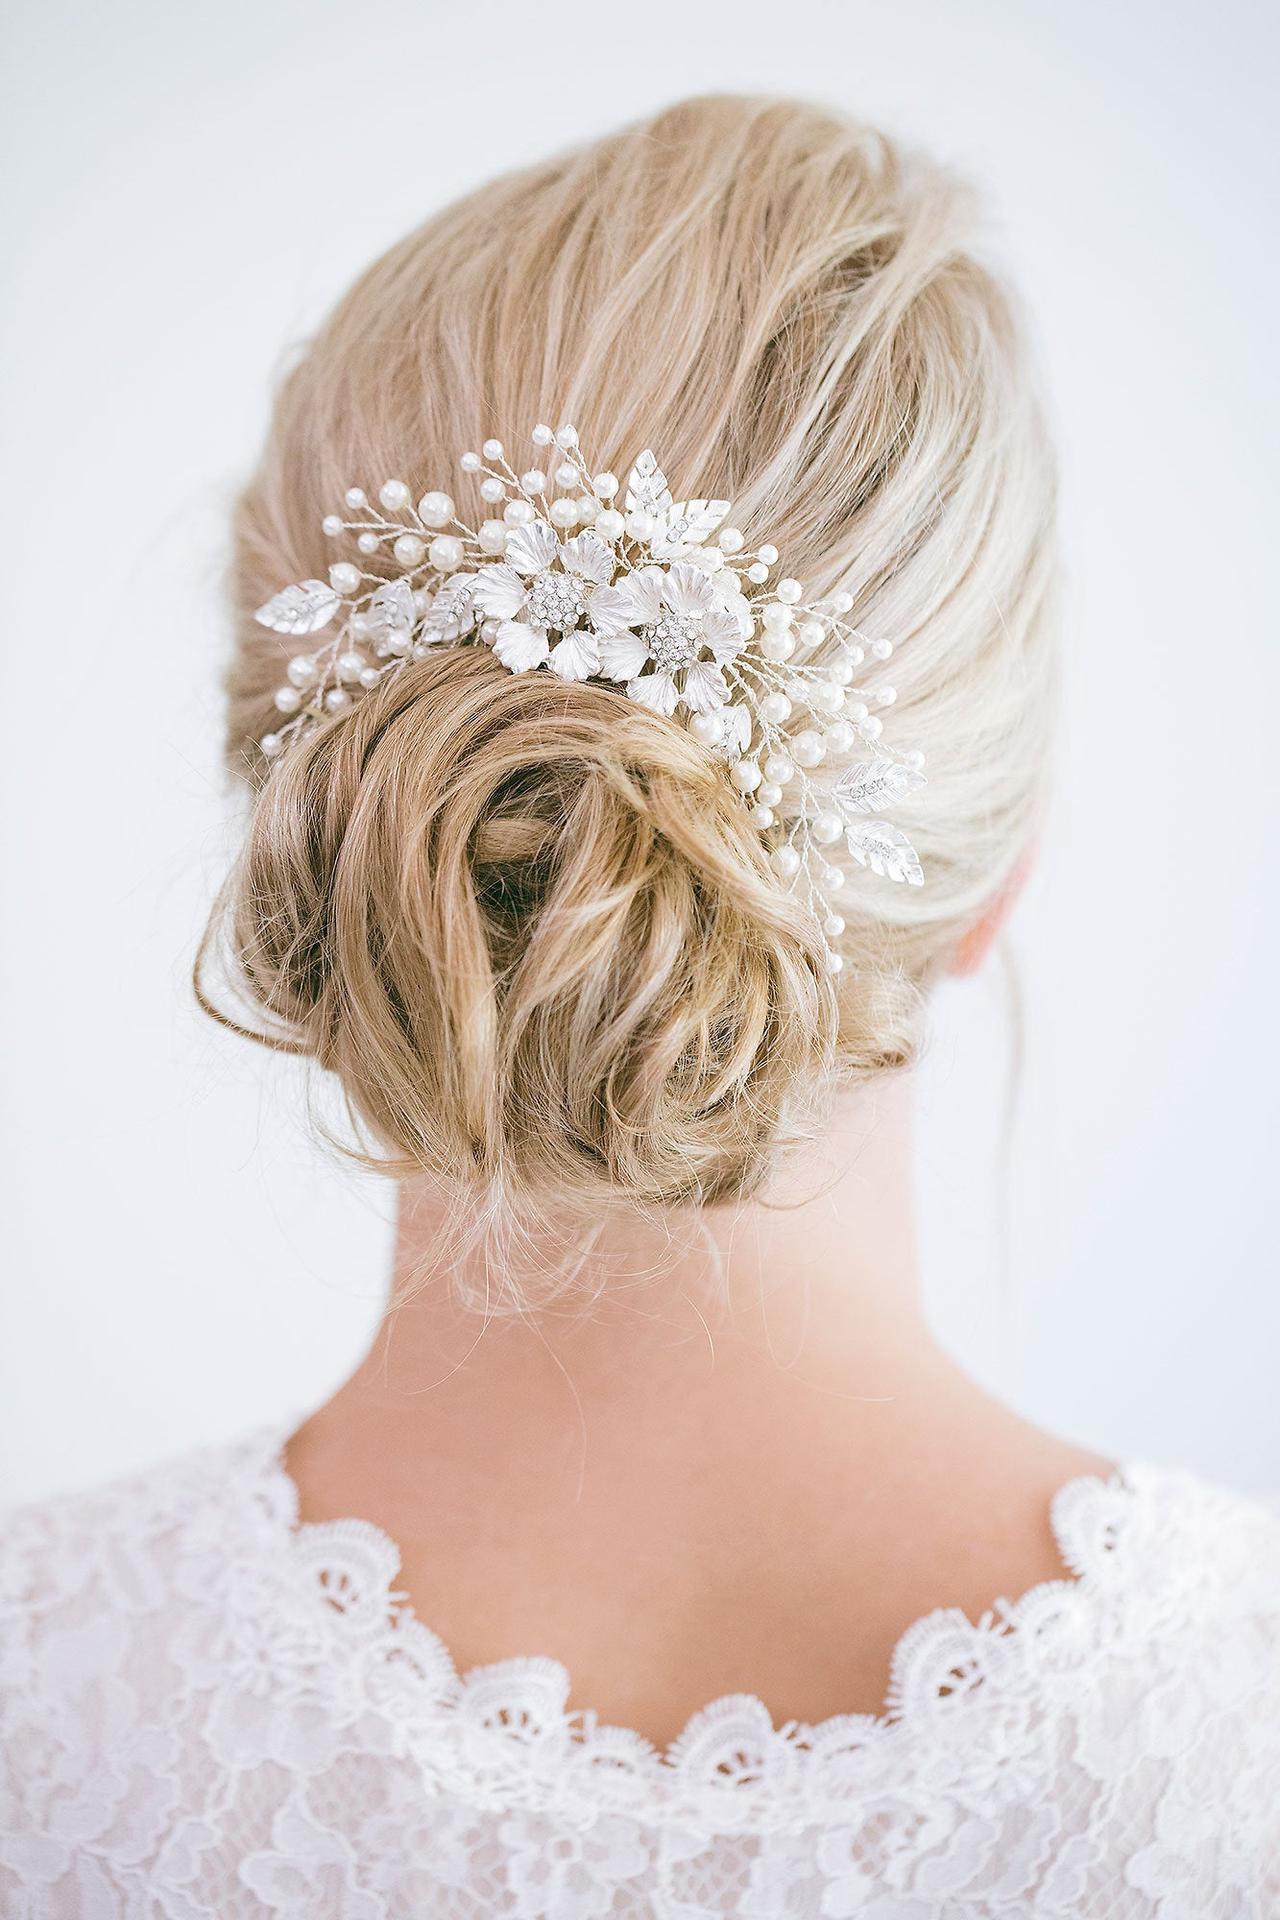 Wedding Hair Accessories For Short Hair - With 87 Accessories To